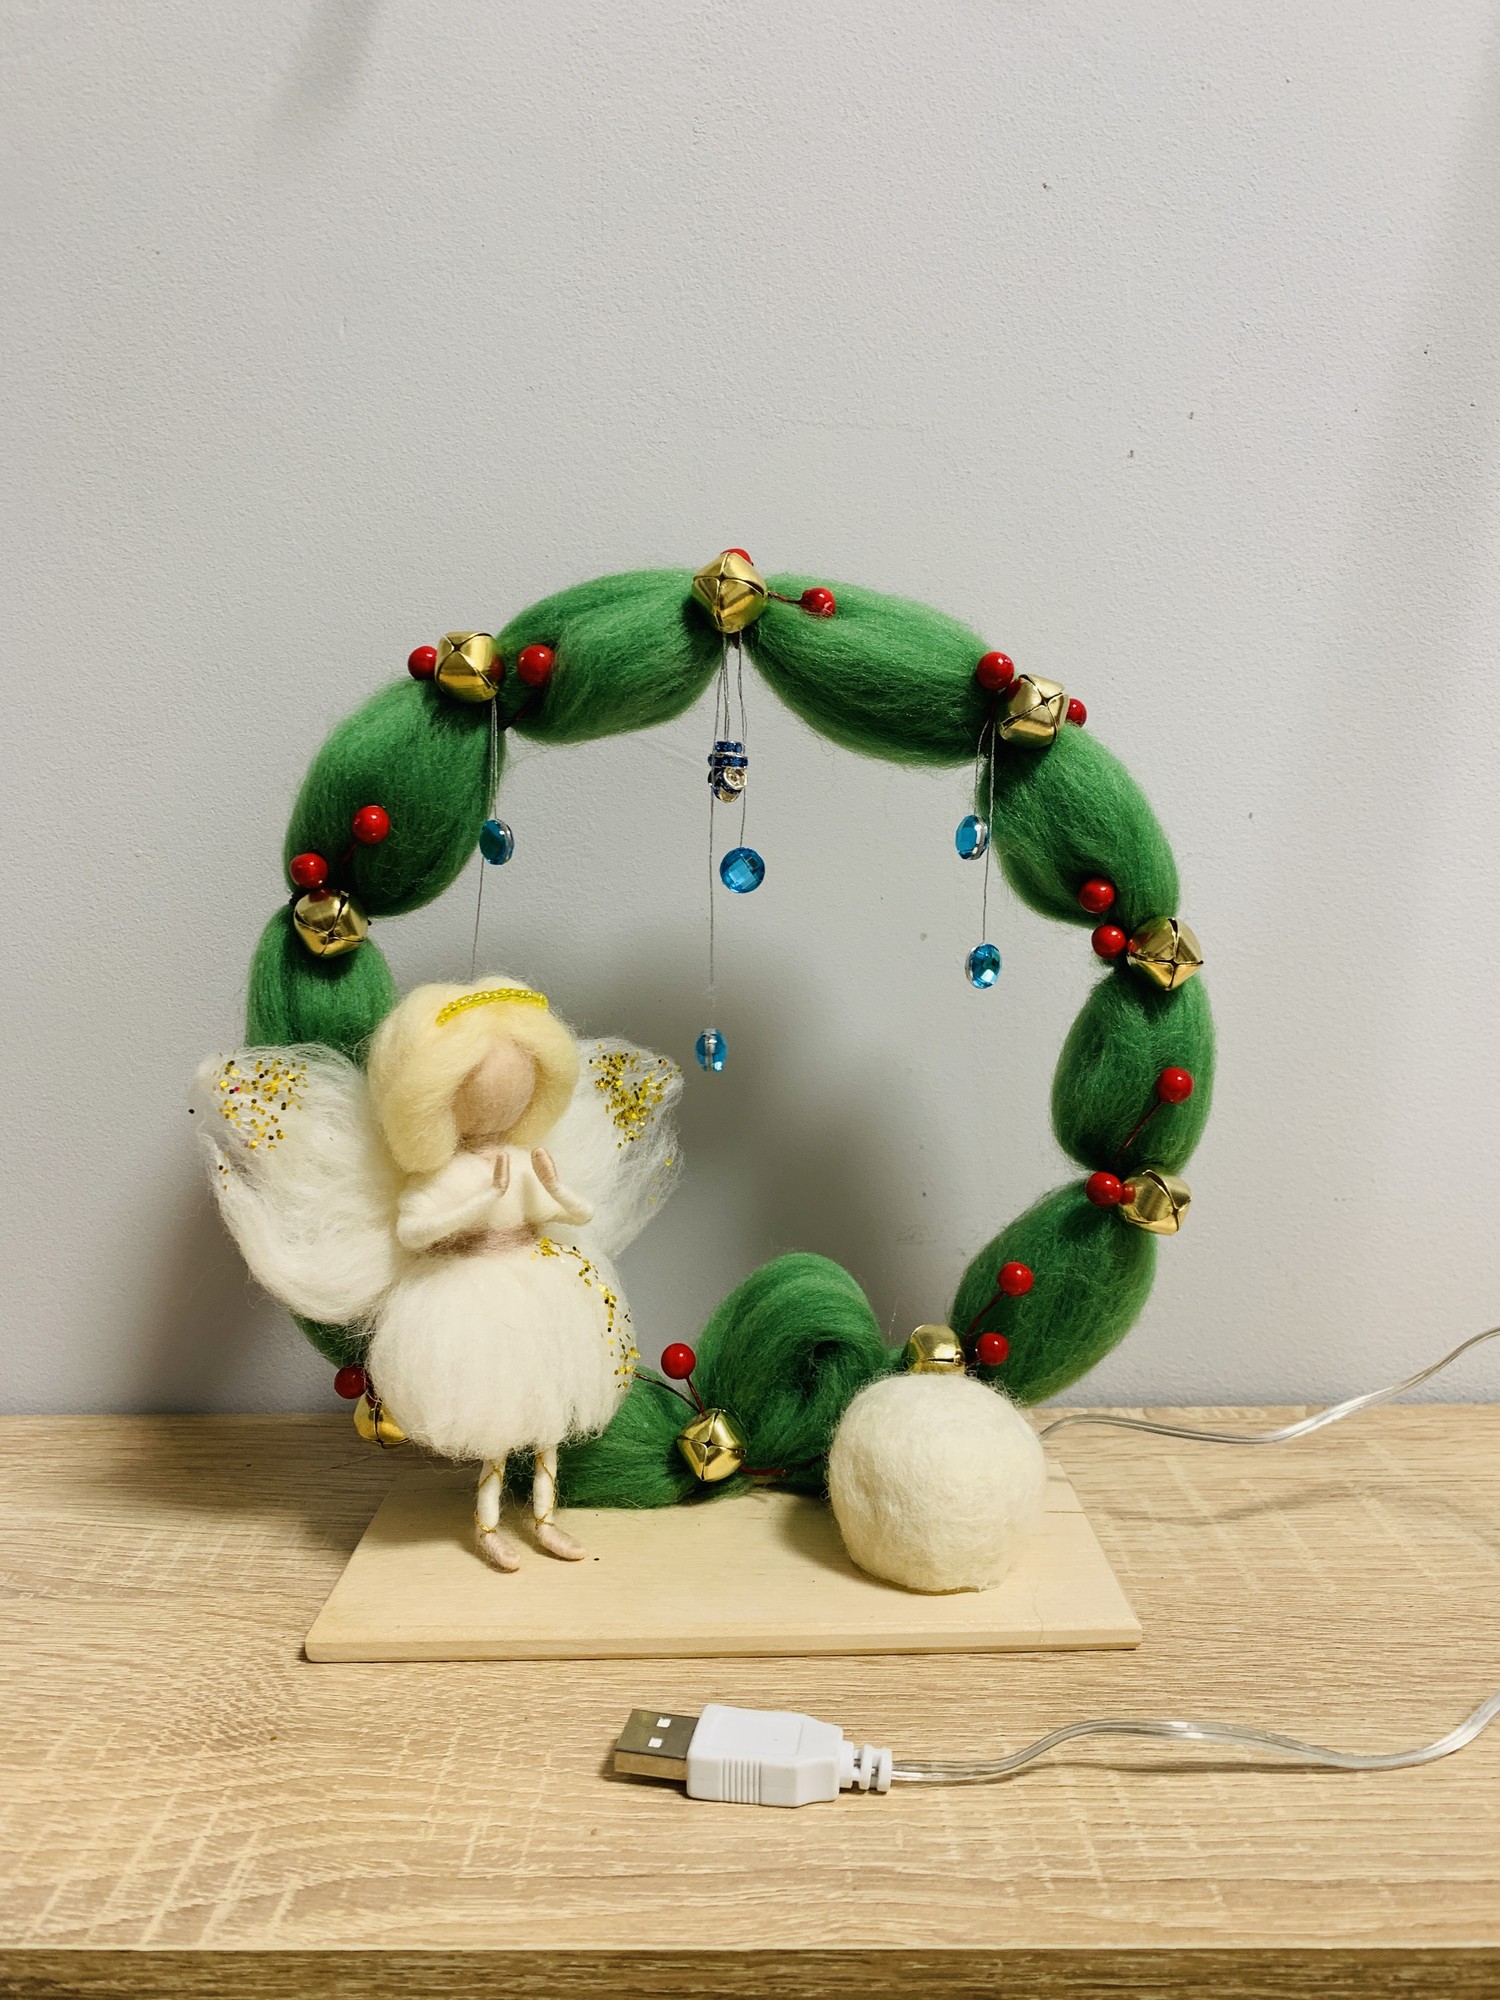 Children's original nightlight with an angel and a green wreath, a unique gift for babies